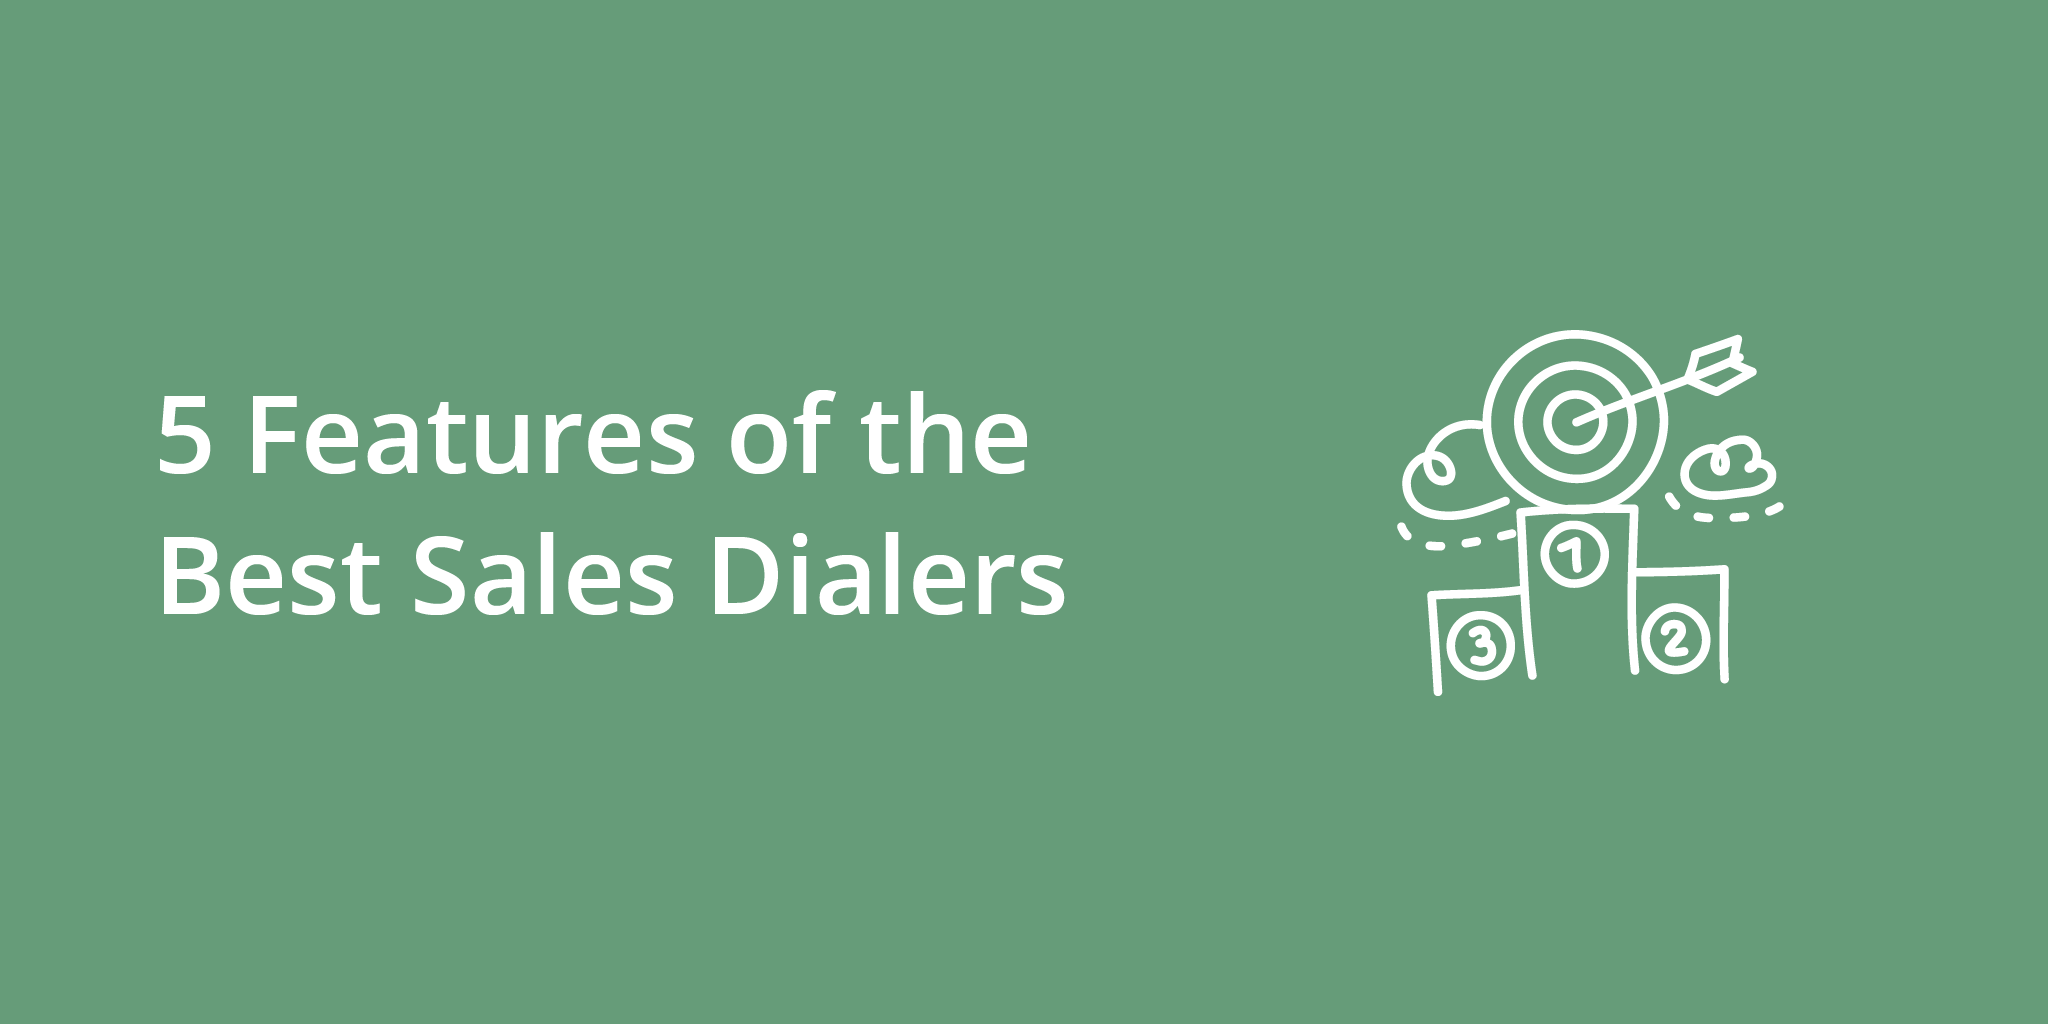 5 Features of the Best Sales Dialers | Telephones for business